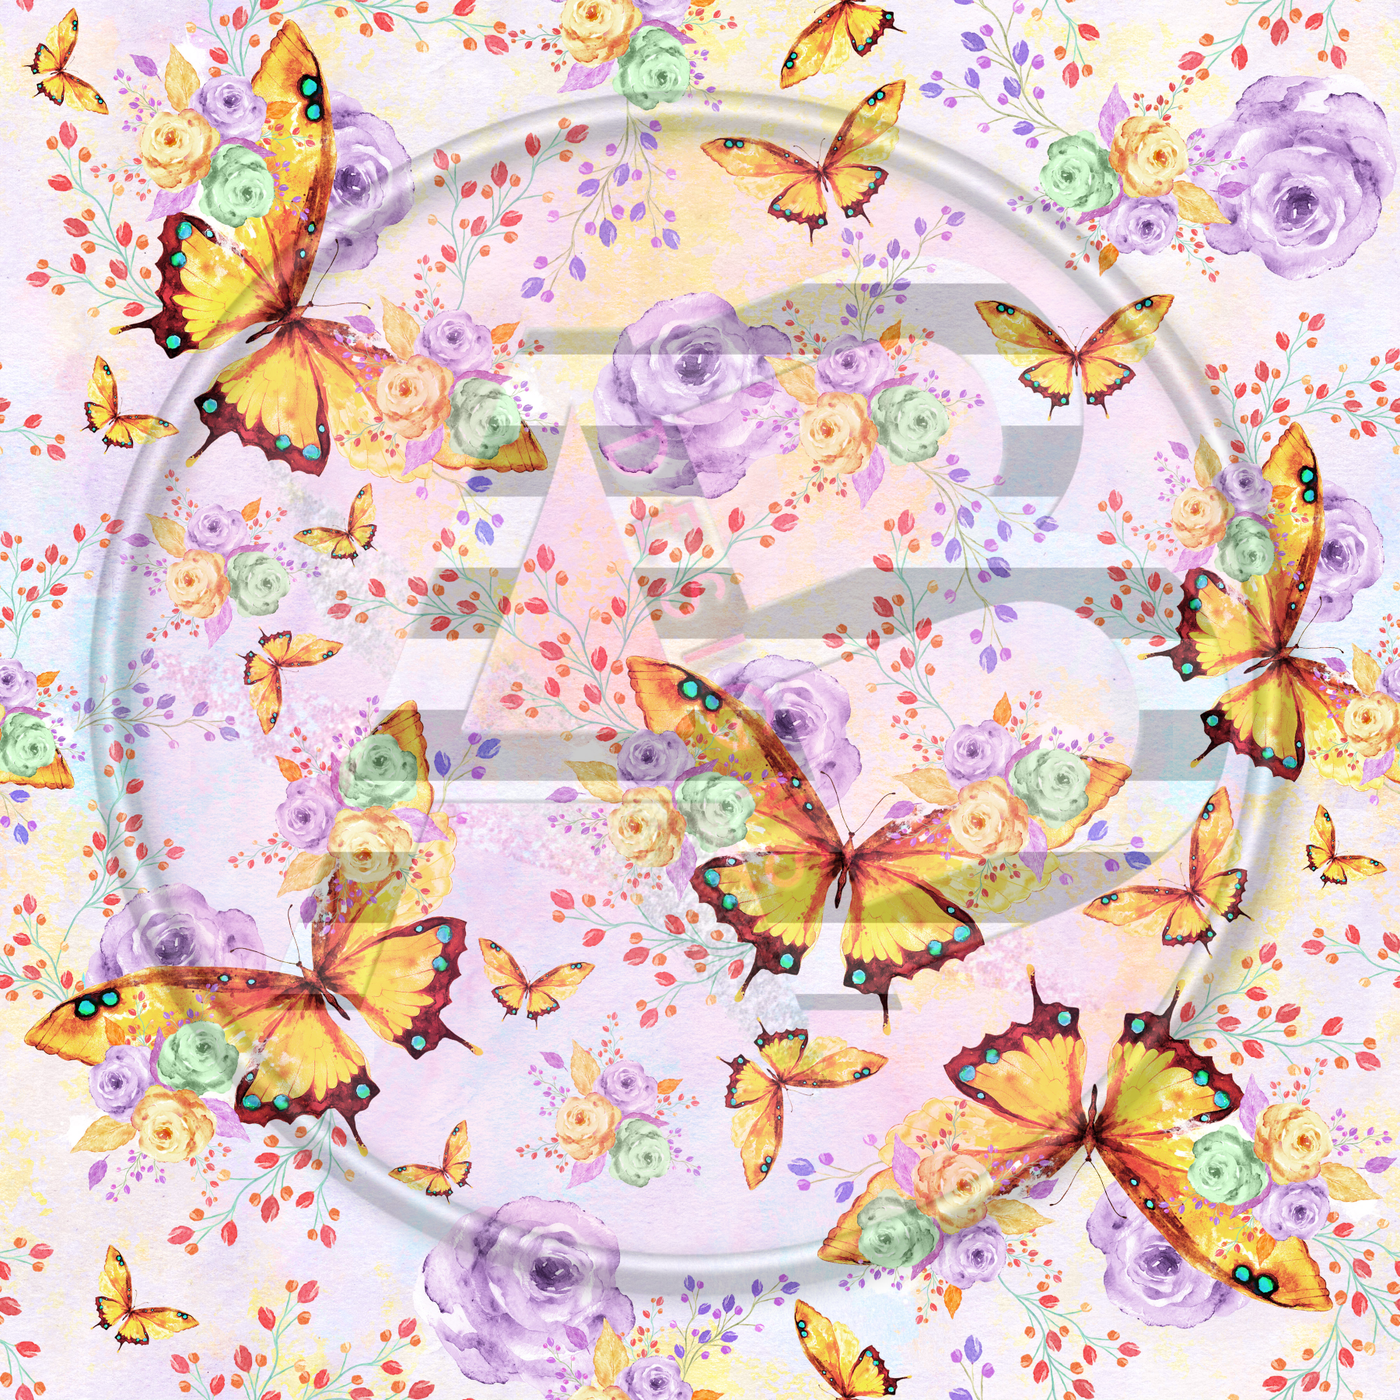 Adhesive Patterned Vinyl - Butterfly 11